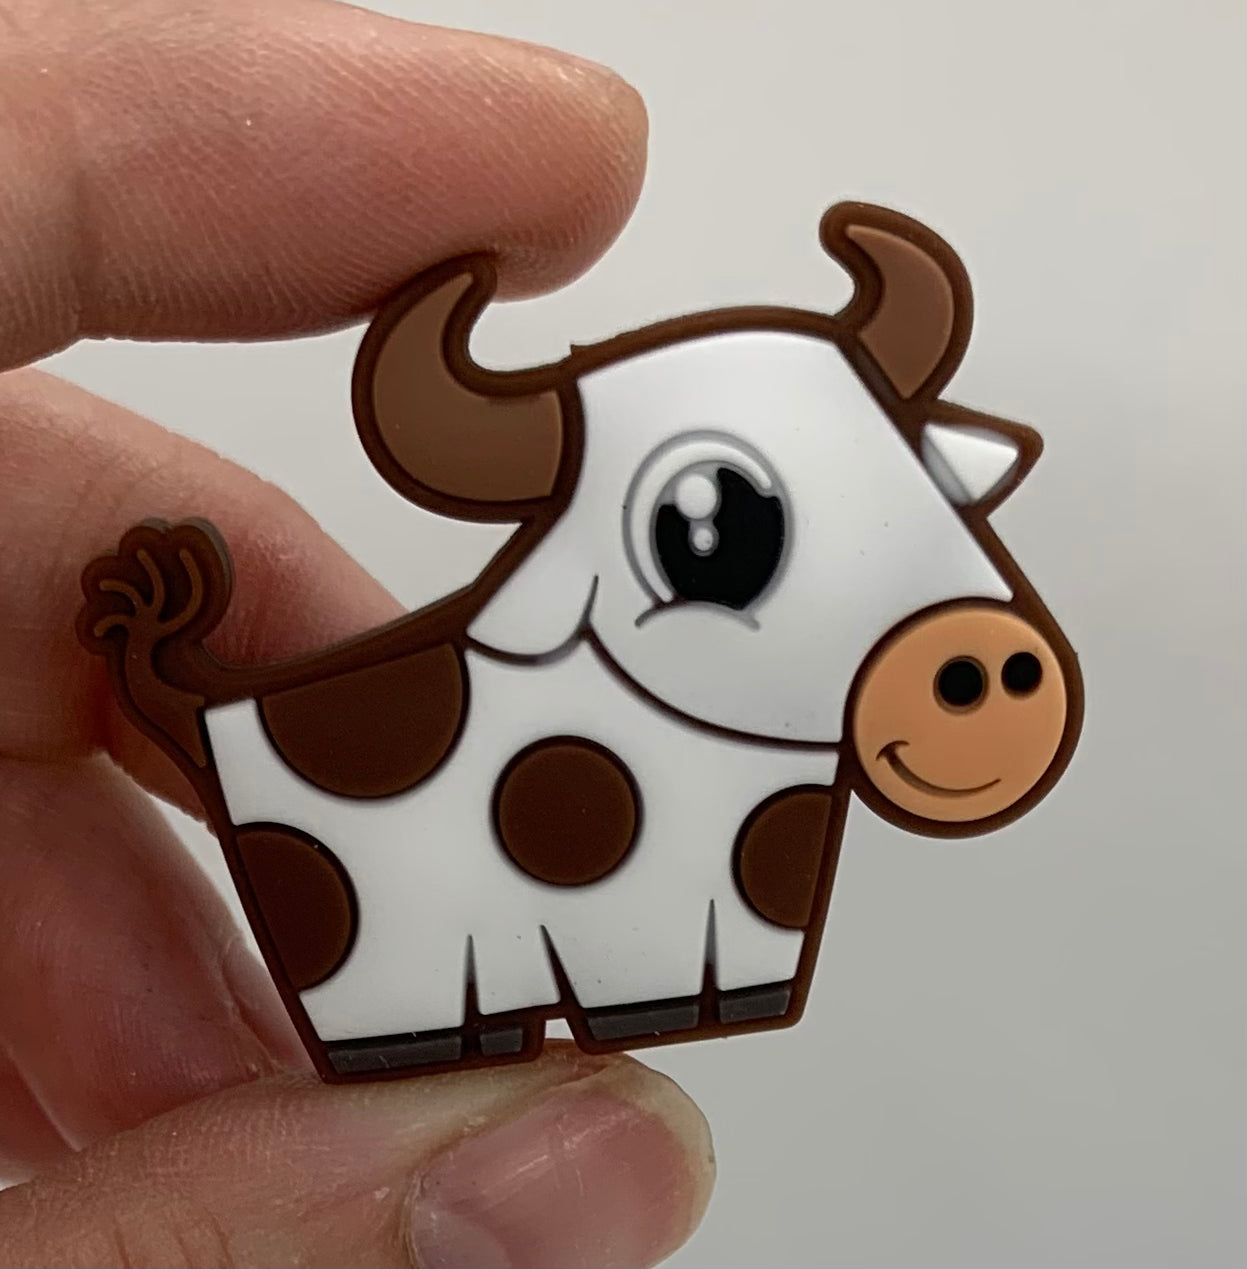 Longhorn Cow Silicone Focal Bead, Longhorn Cow Silicone Bead, Animal Shape Silicone Bead, Farm Focal